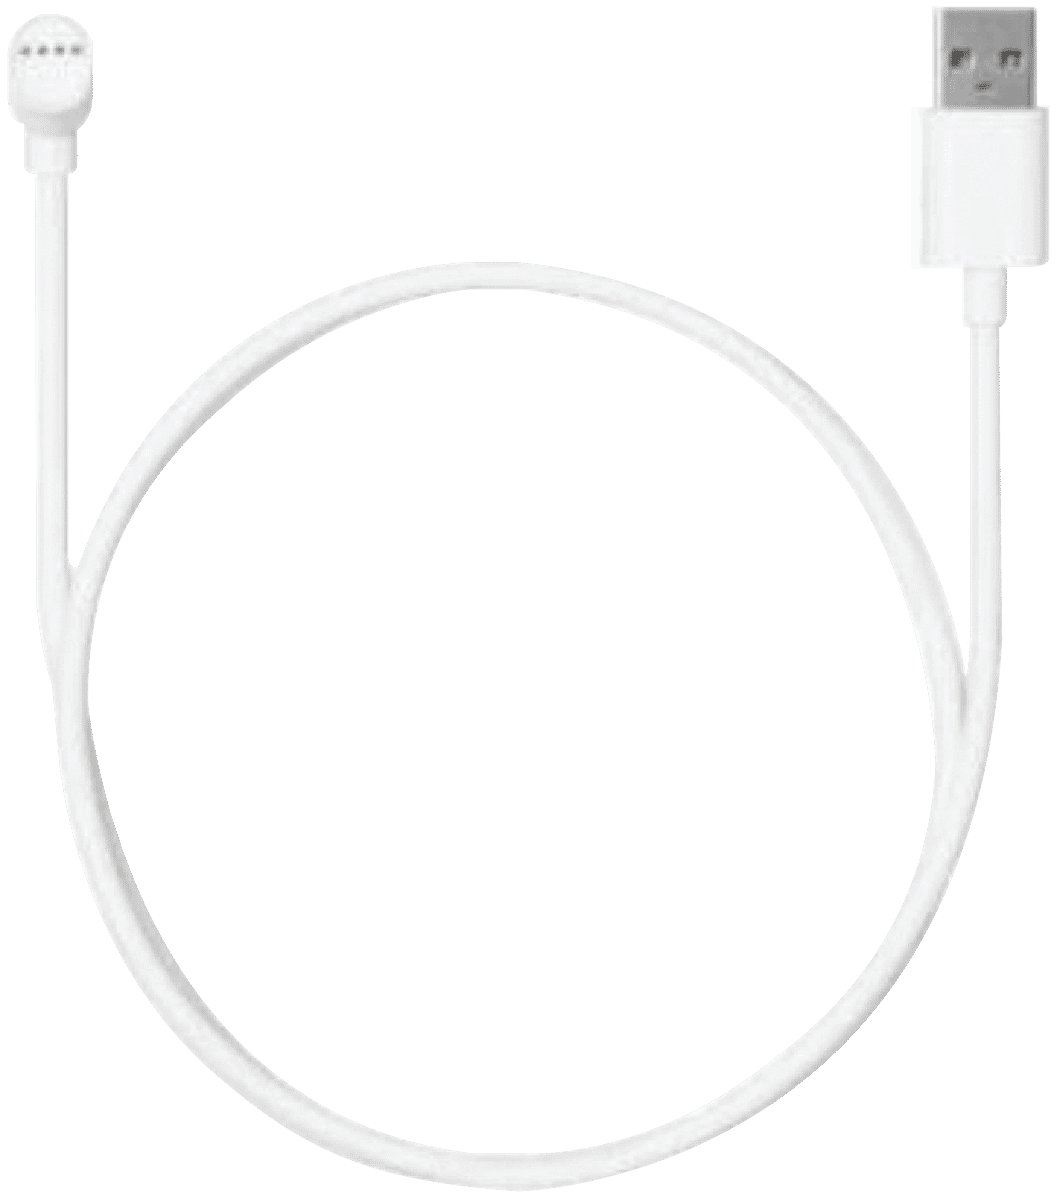 Google GA02279-US 1m (3.2') Replacement Cable for Nest Security Cameras -  White